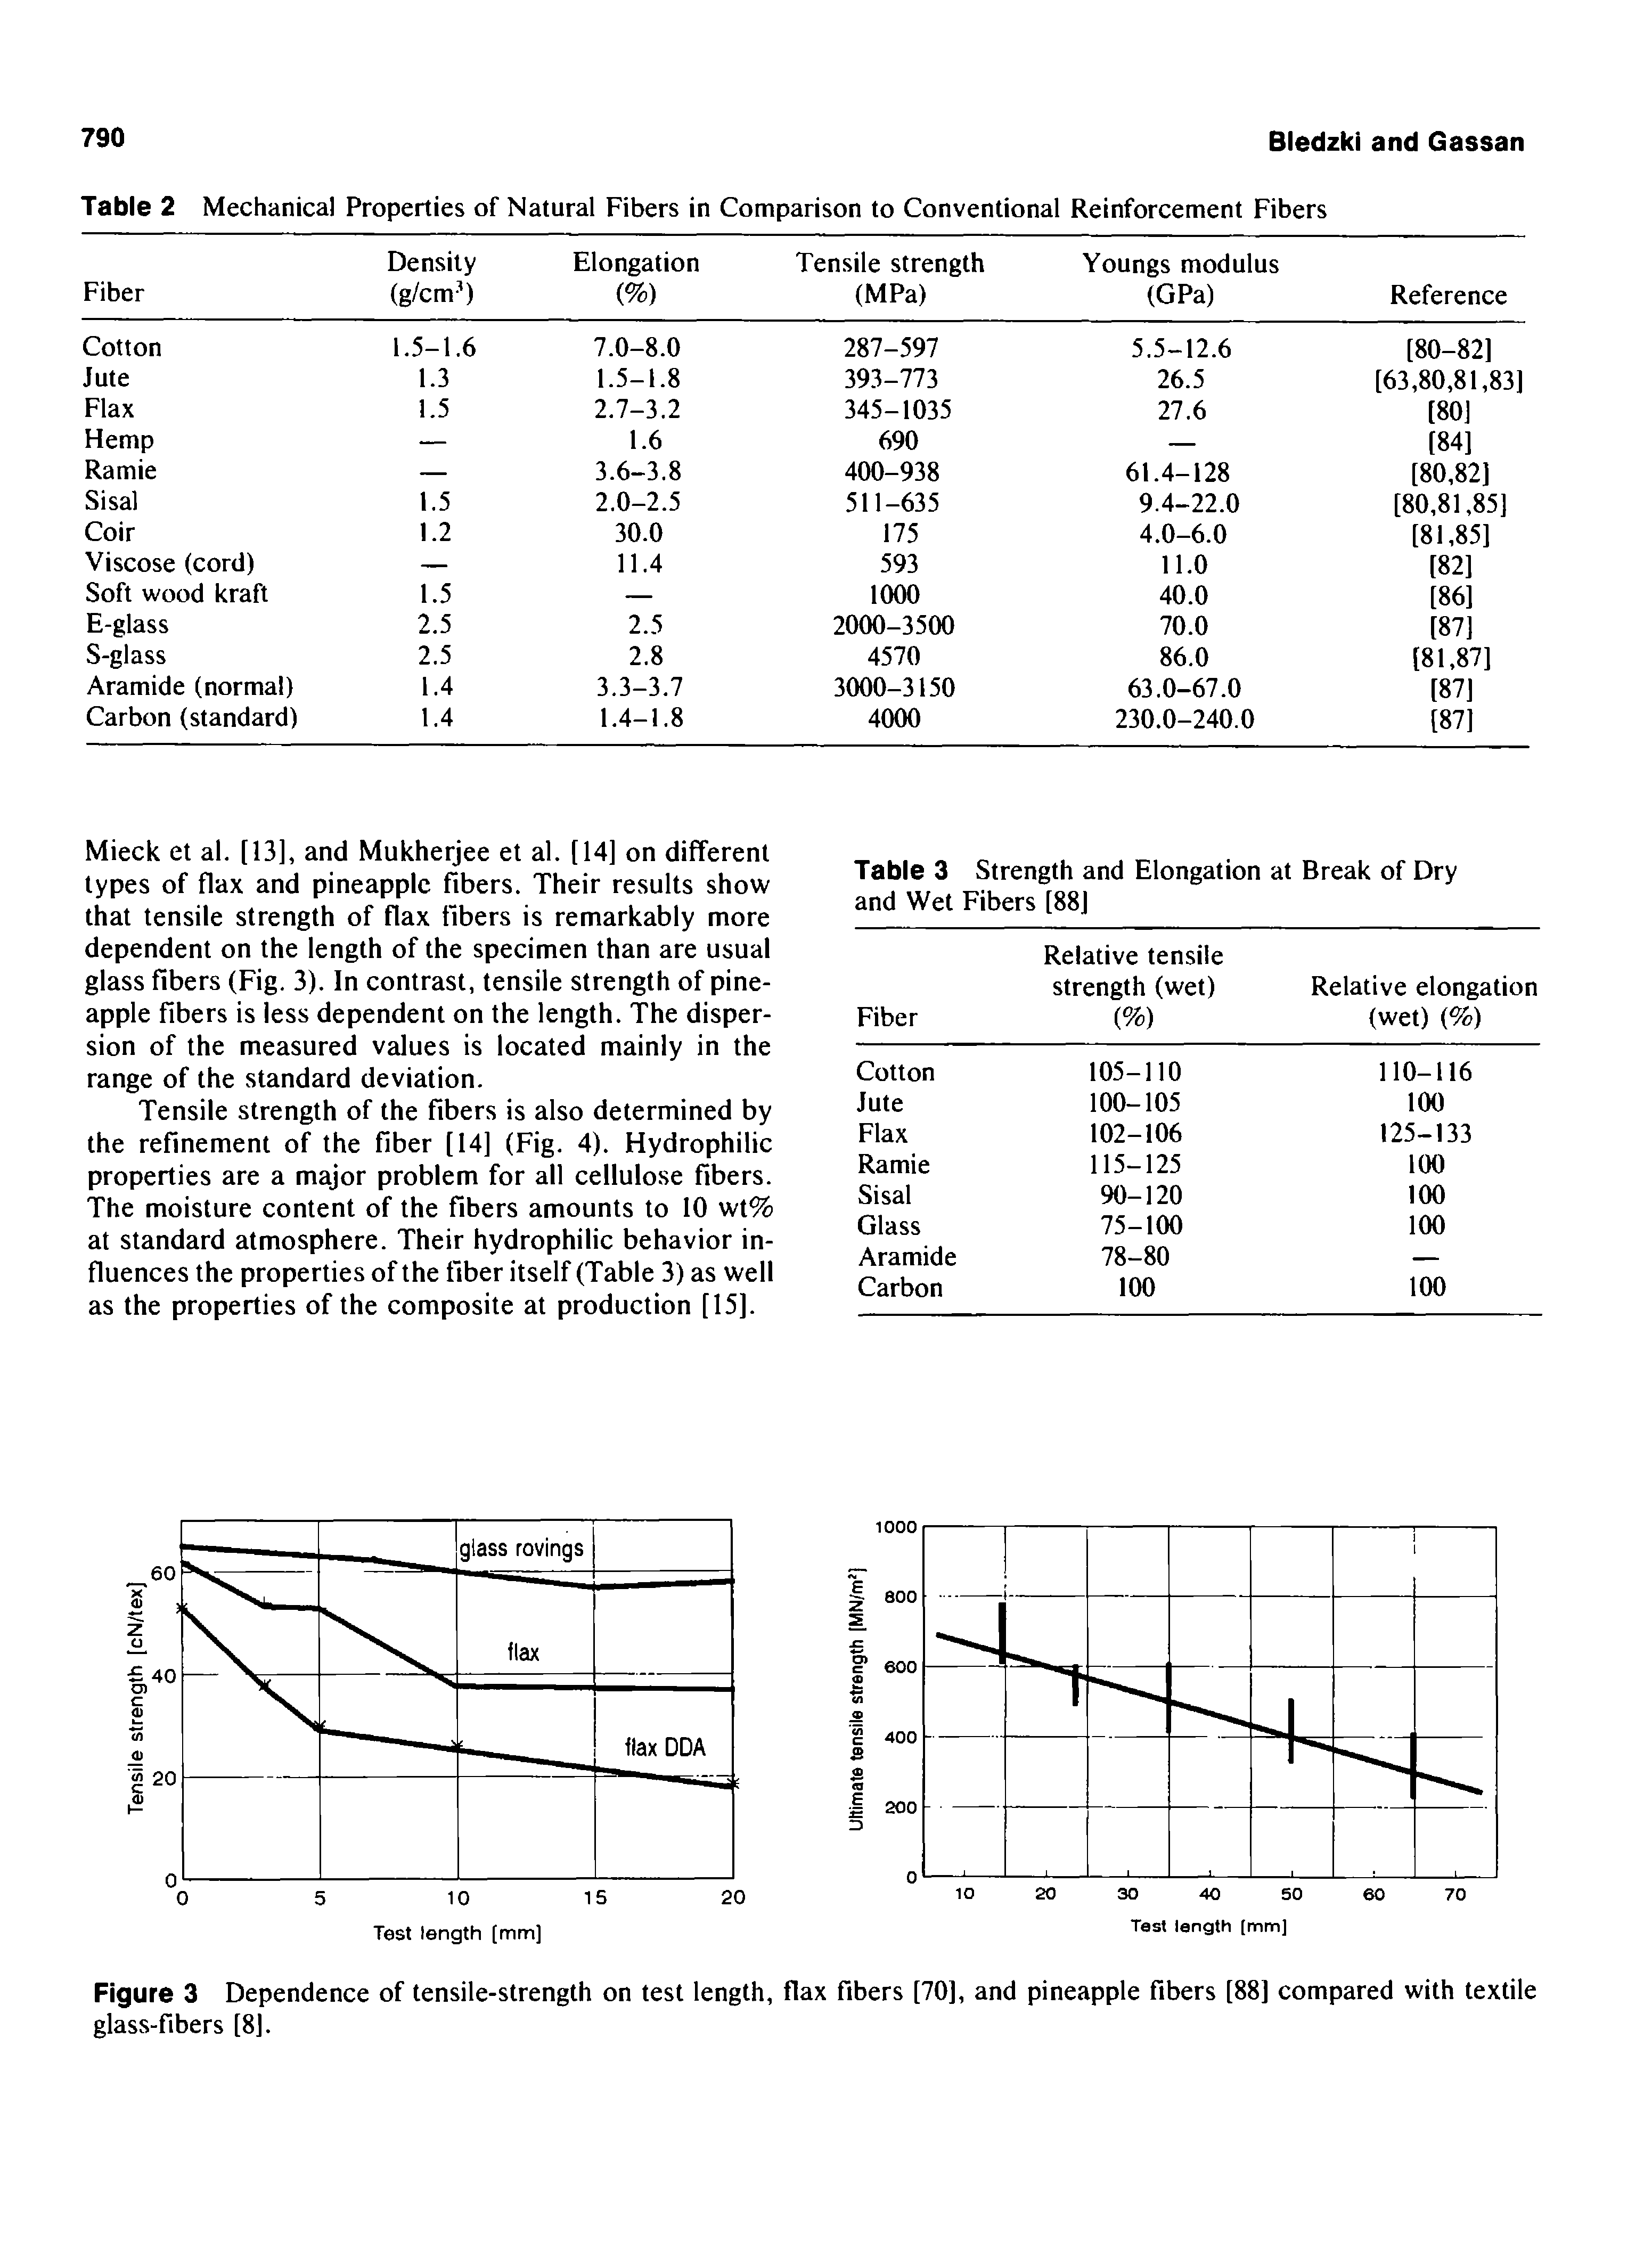 Figure 3 Dependence of tensile-strength on test length, flax fibers [70], and pineapple fibers [88] compared with textile glass-fibers [8].